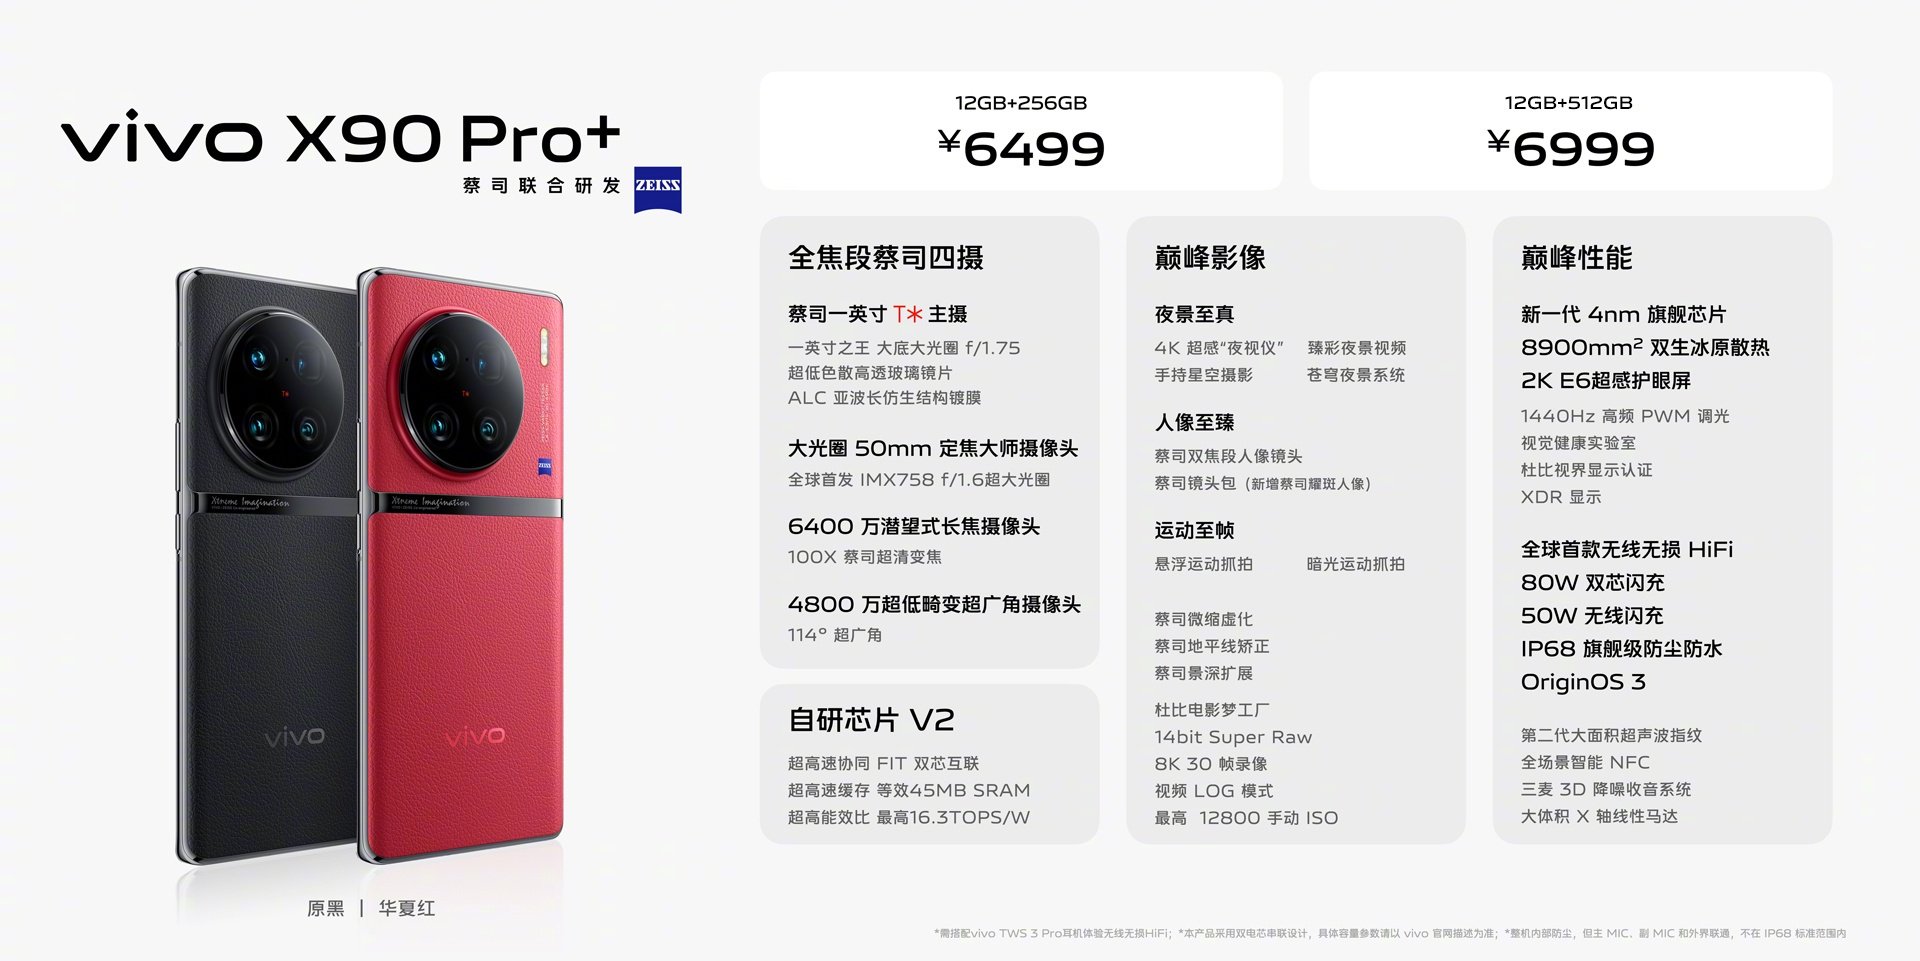 Vivo X90 Pro+: Premium smartphone launched in China with a